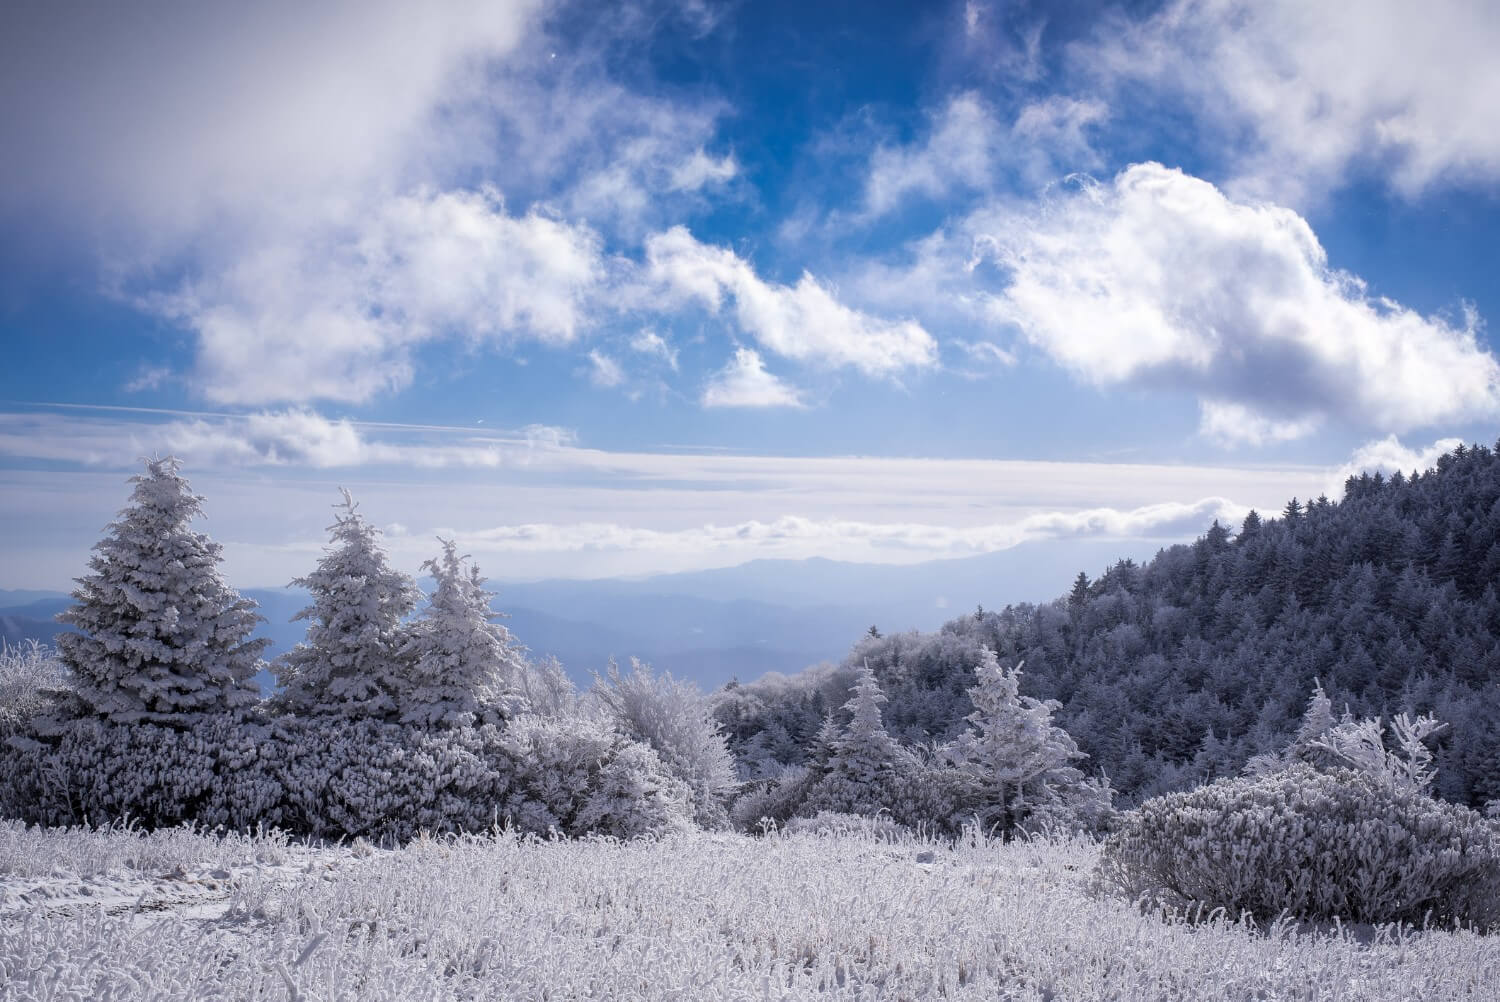 blue ridge parkway in winter, covered in snow